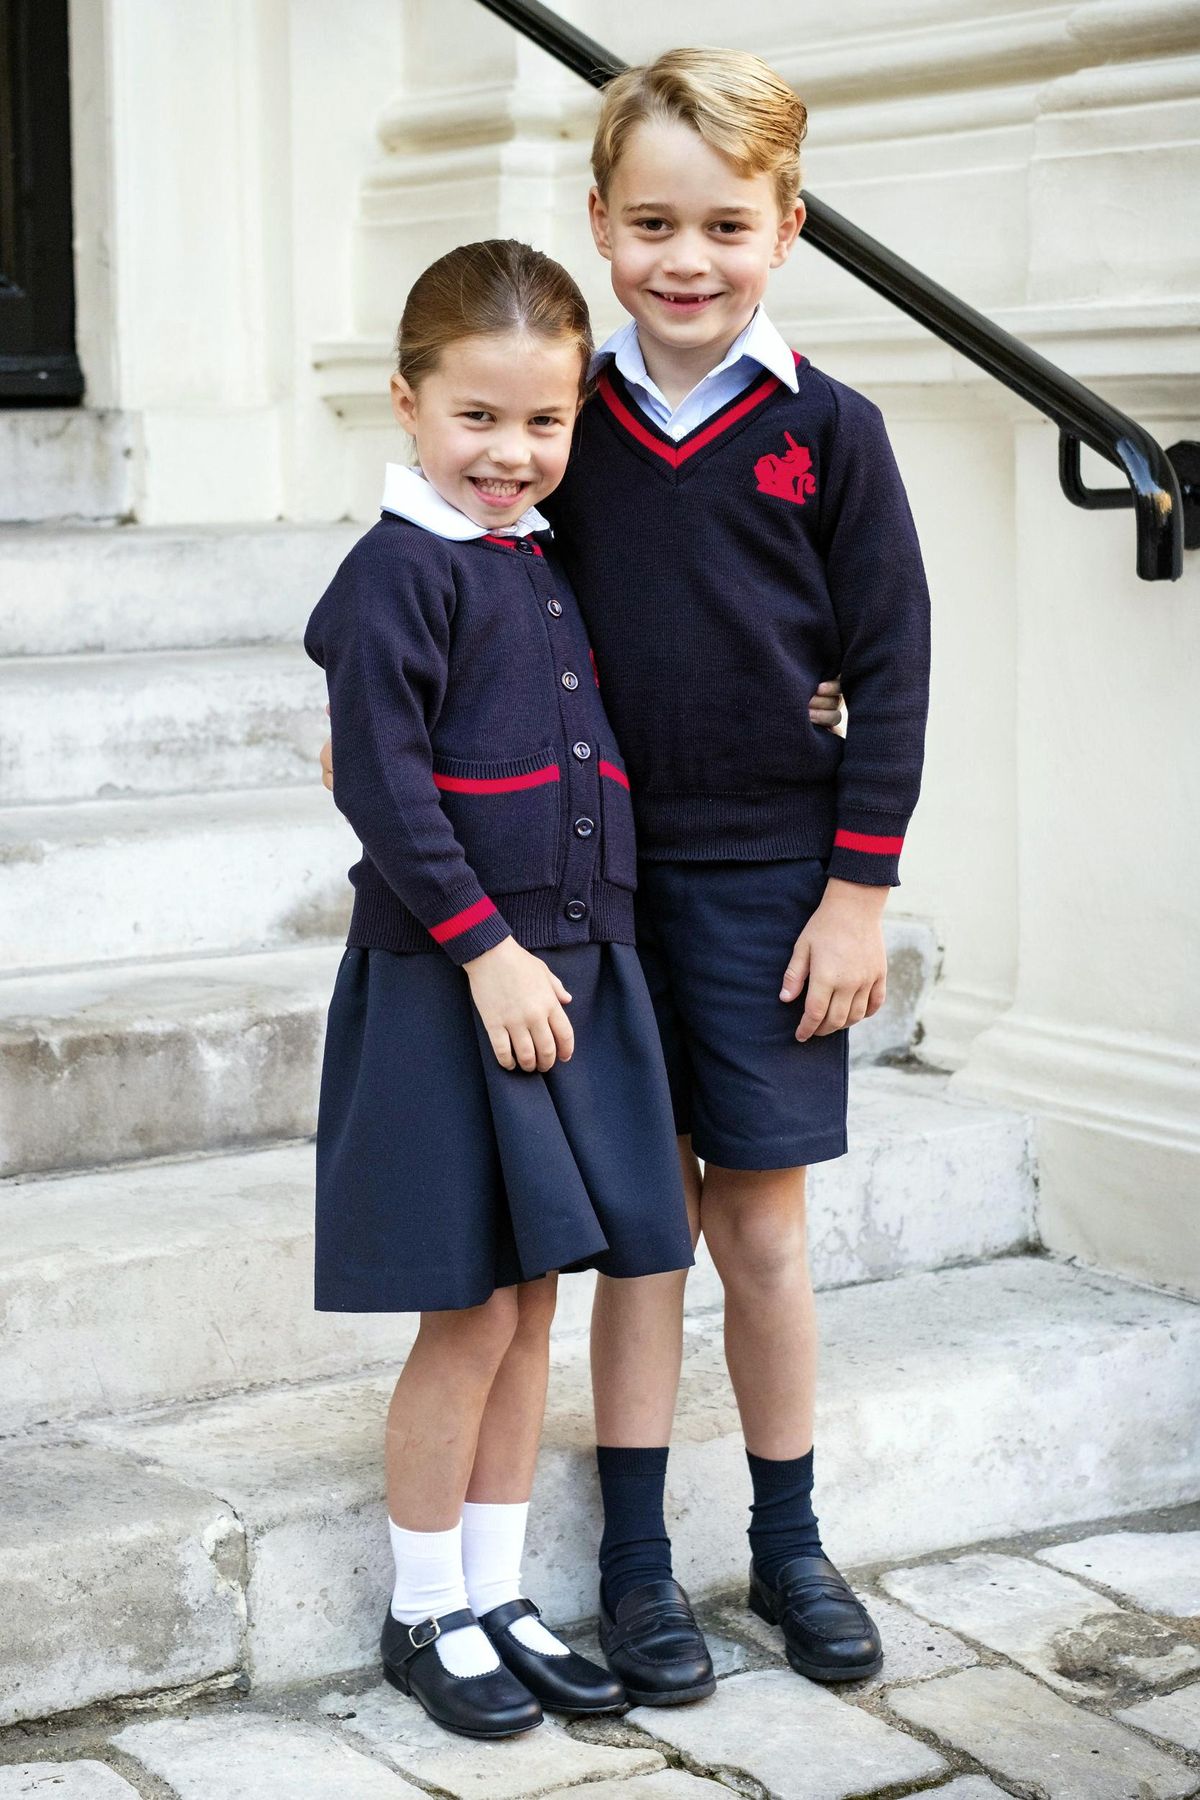 In this photo released by Kensington Palace, Britain’s Princess Charlotte poses with her brother Prince George before her first day of school at Thomas’s Battersea, in London, Thursday, Sept. 5, 2019. (Kensington Palace / Associated Press)